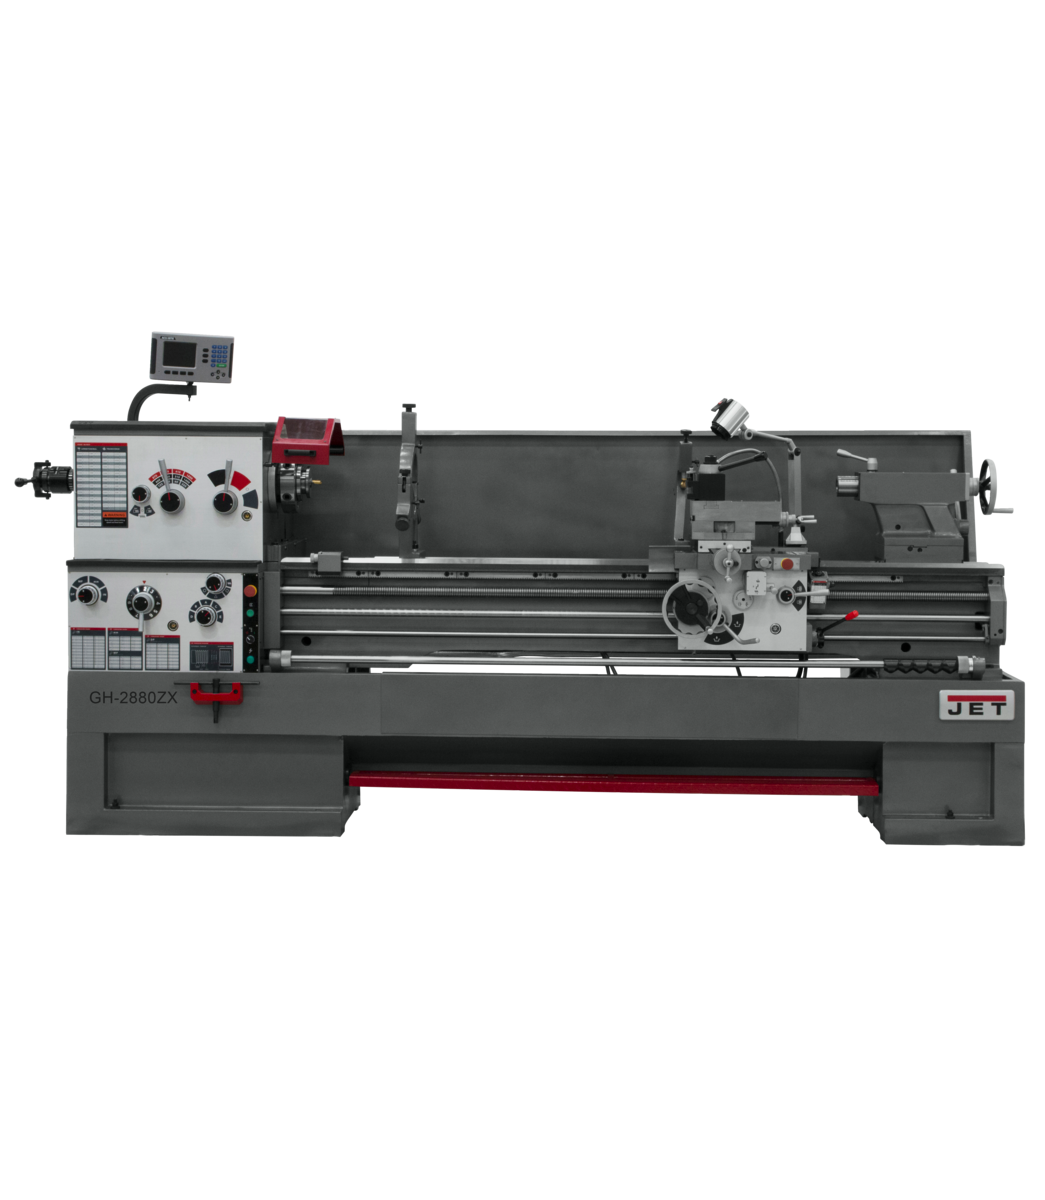 321567, GH-2280ZX, with 2-axis ACU-RITE 203 DRO and Taper Attachment, Jet, Metalworking, Turning, Lathes